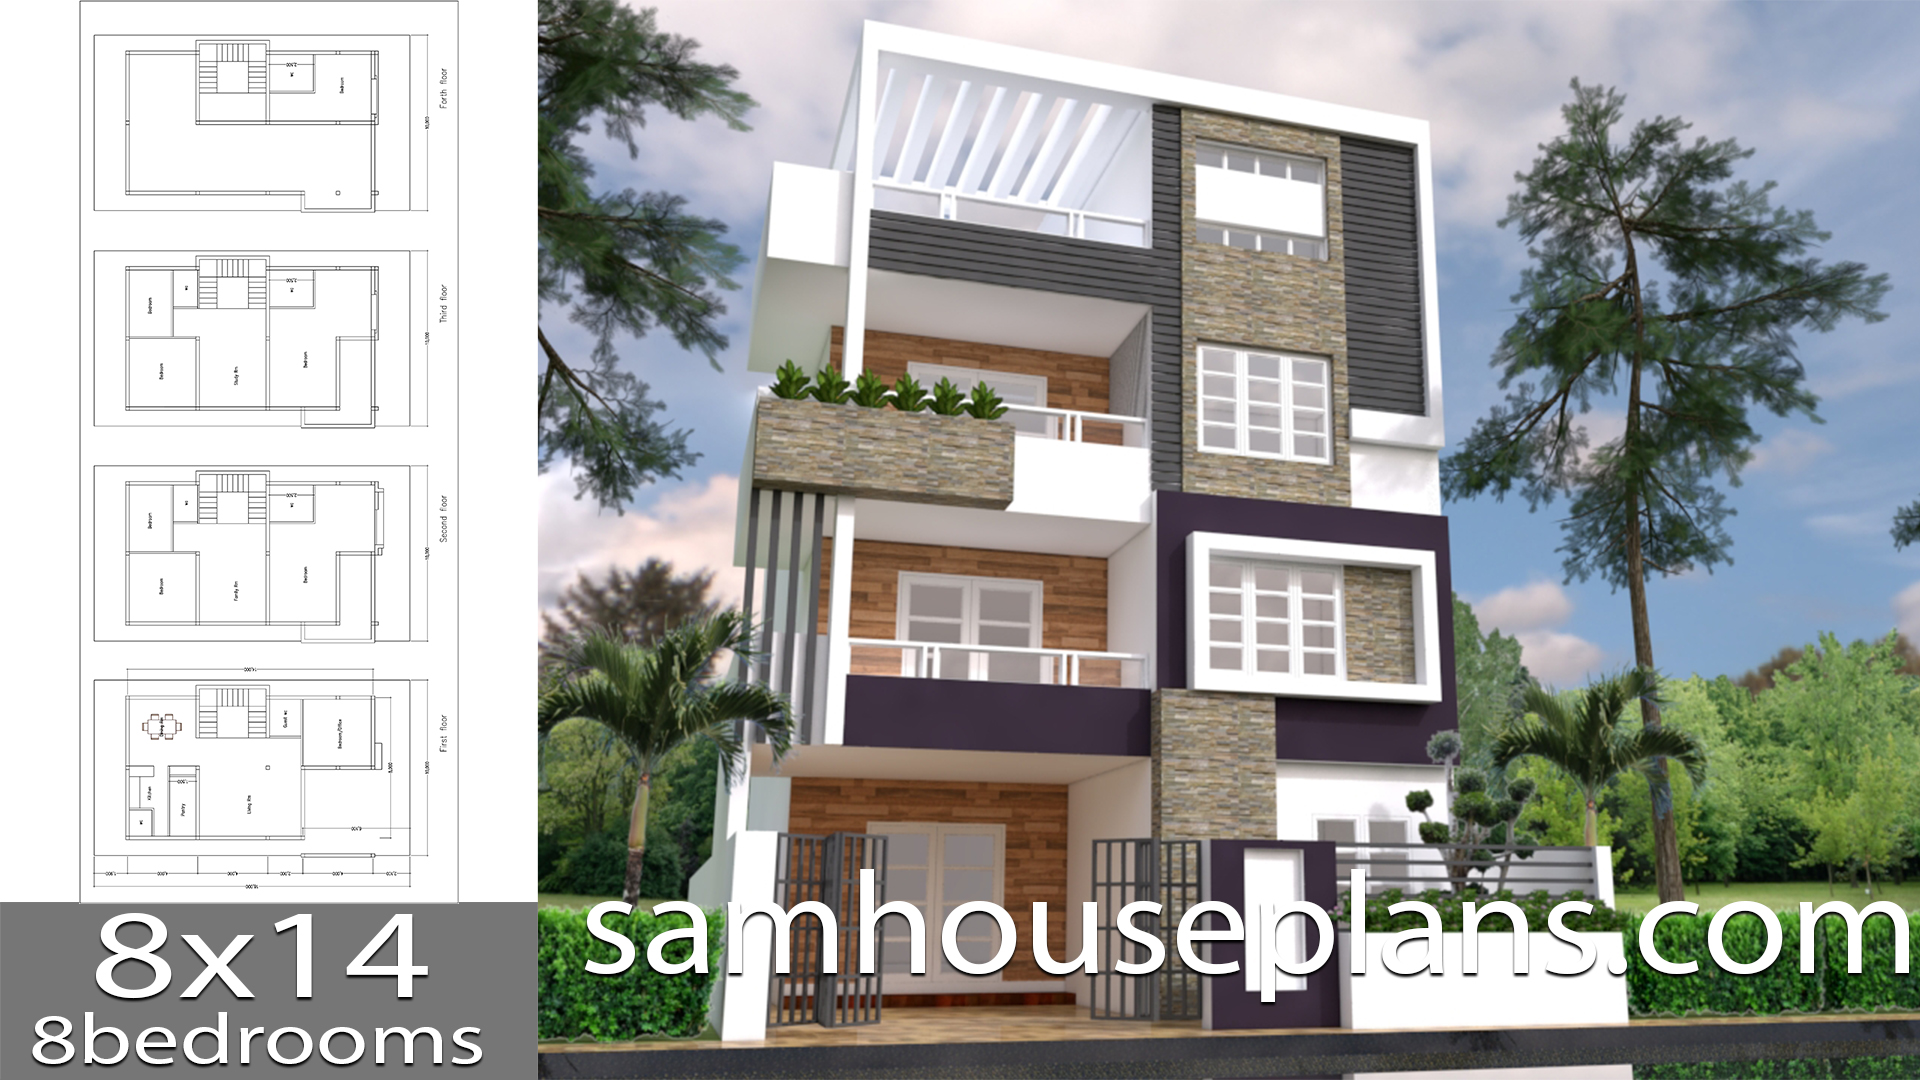 House Plans 8x14 With 8 Bedrooms Samhouseplans